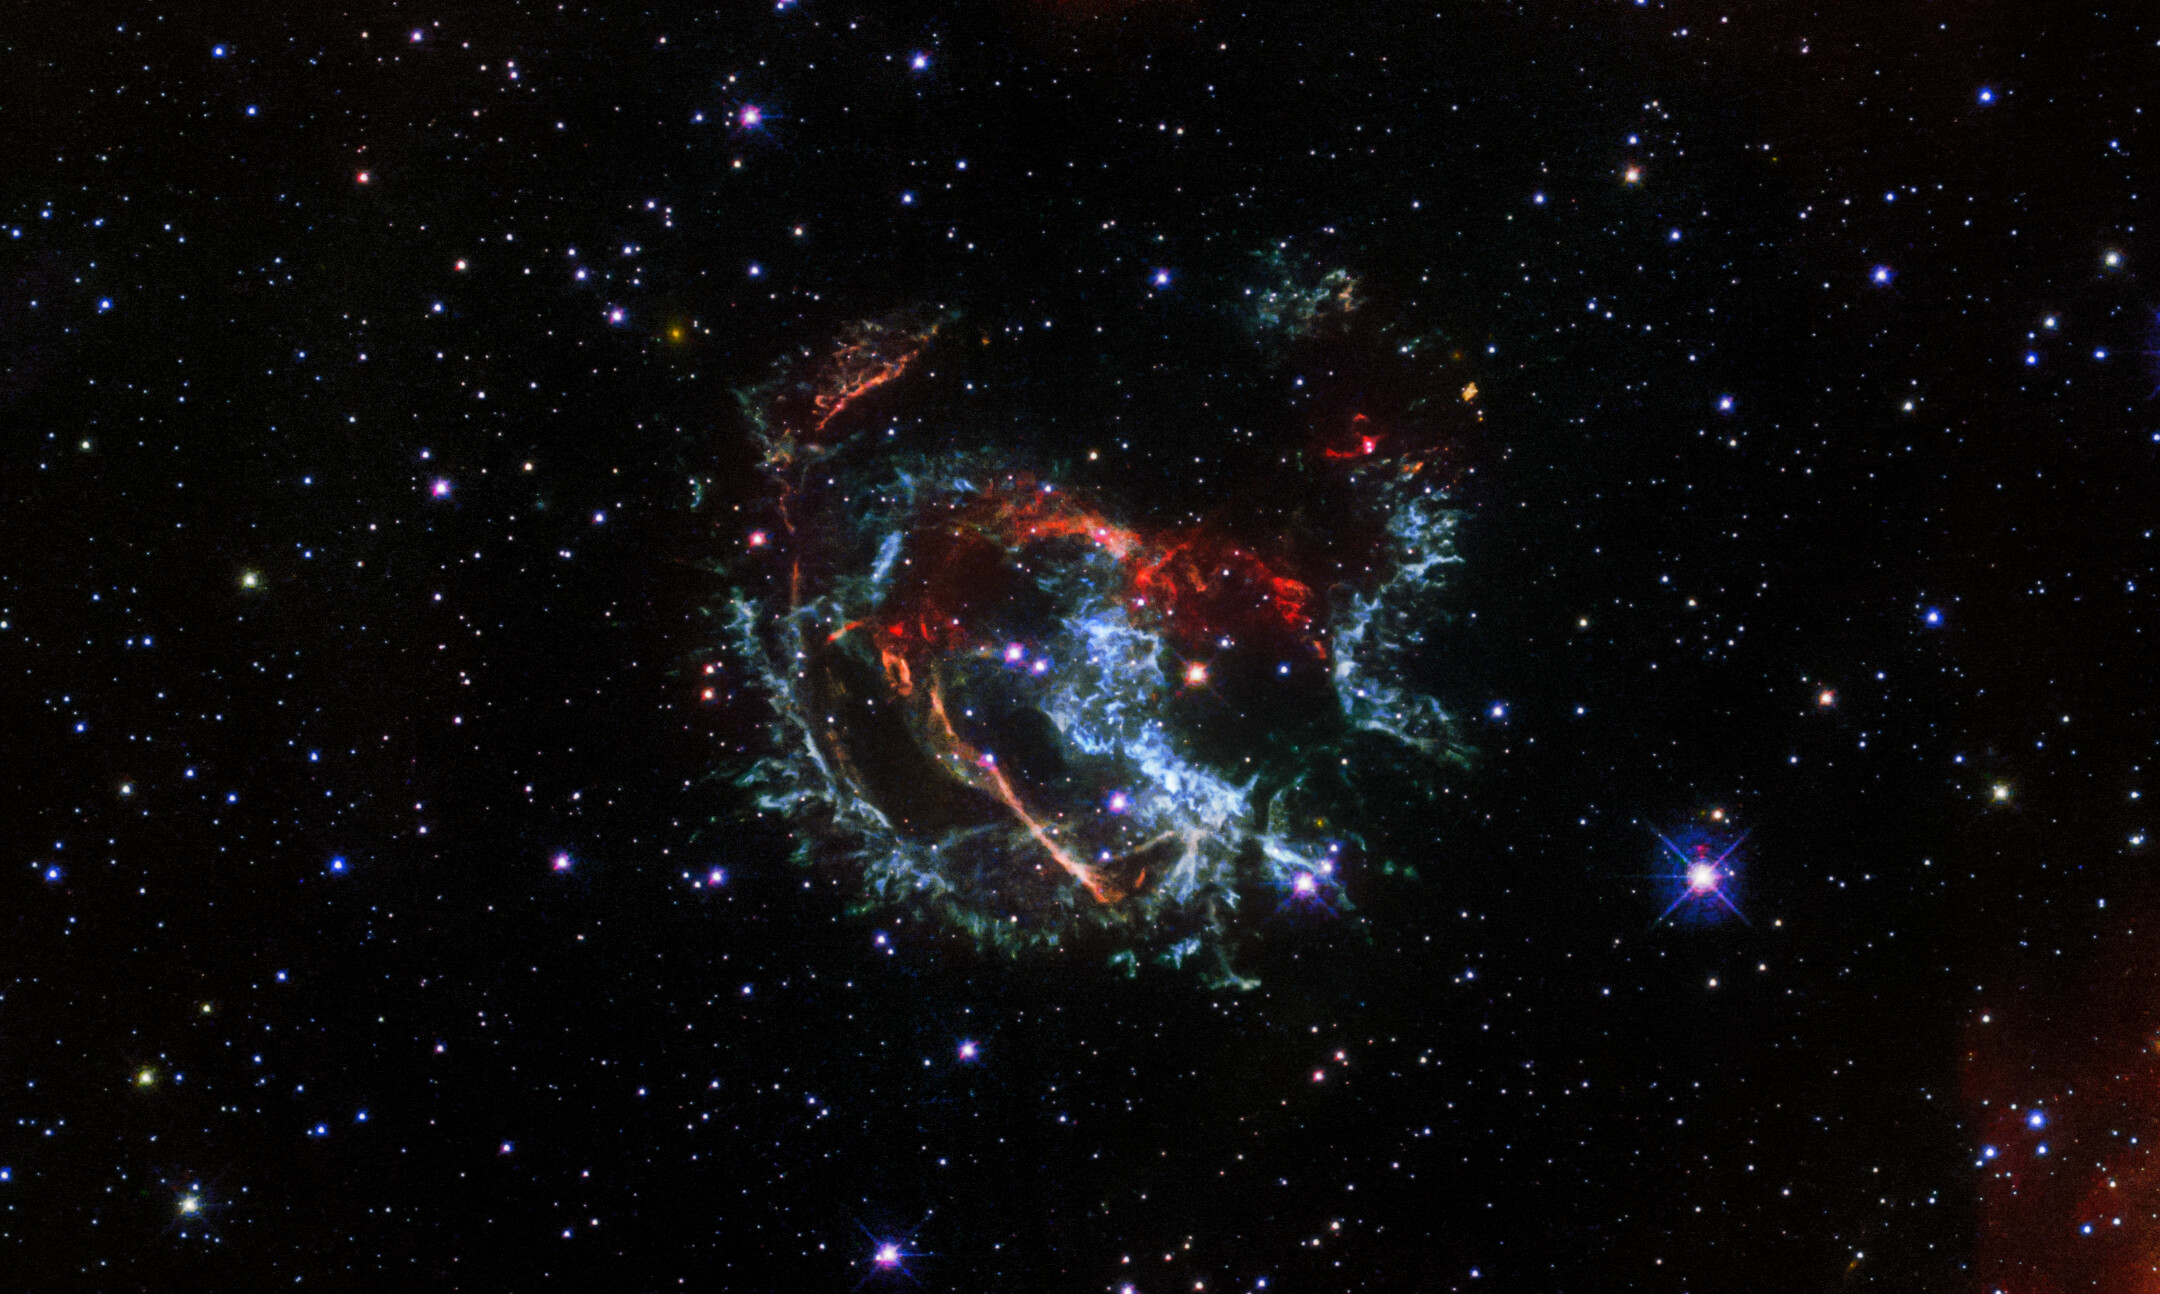 The month of January is illustrated with this image of supernova remnant 1E 0102.2-7219, located 200,000 light-years from us. Credit: NASA, ESA, and J. Banovetz and D. Milisavljevic (Purdue University)